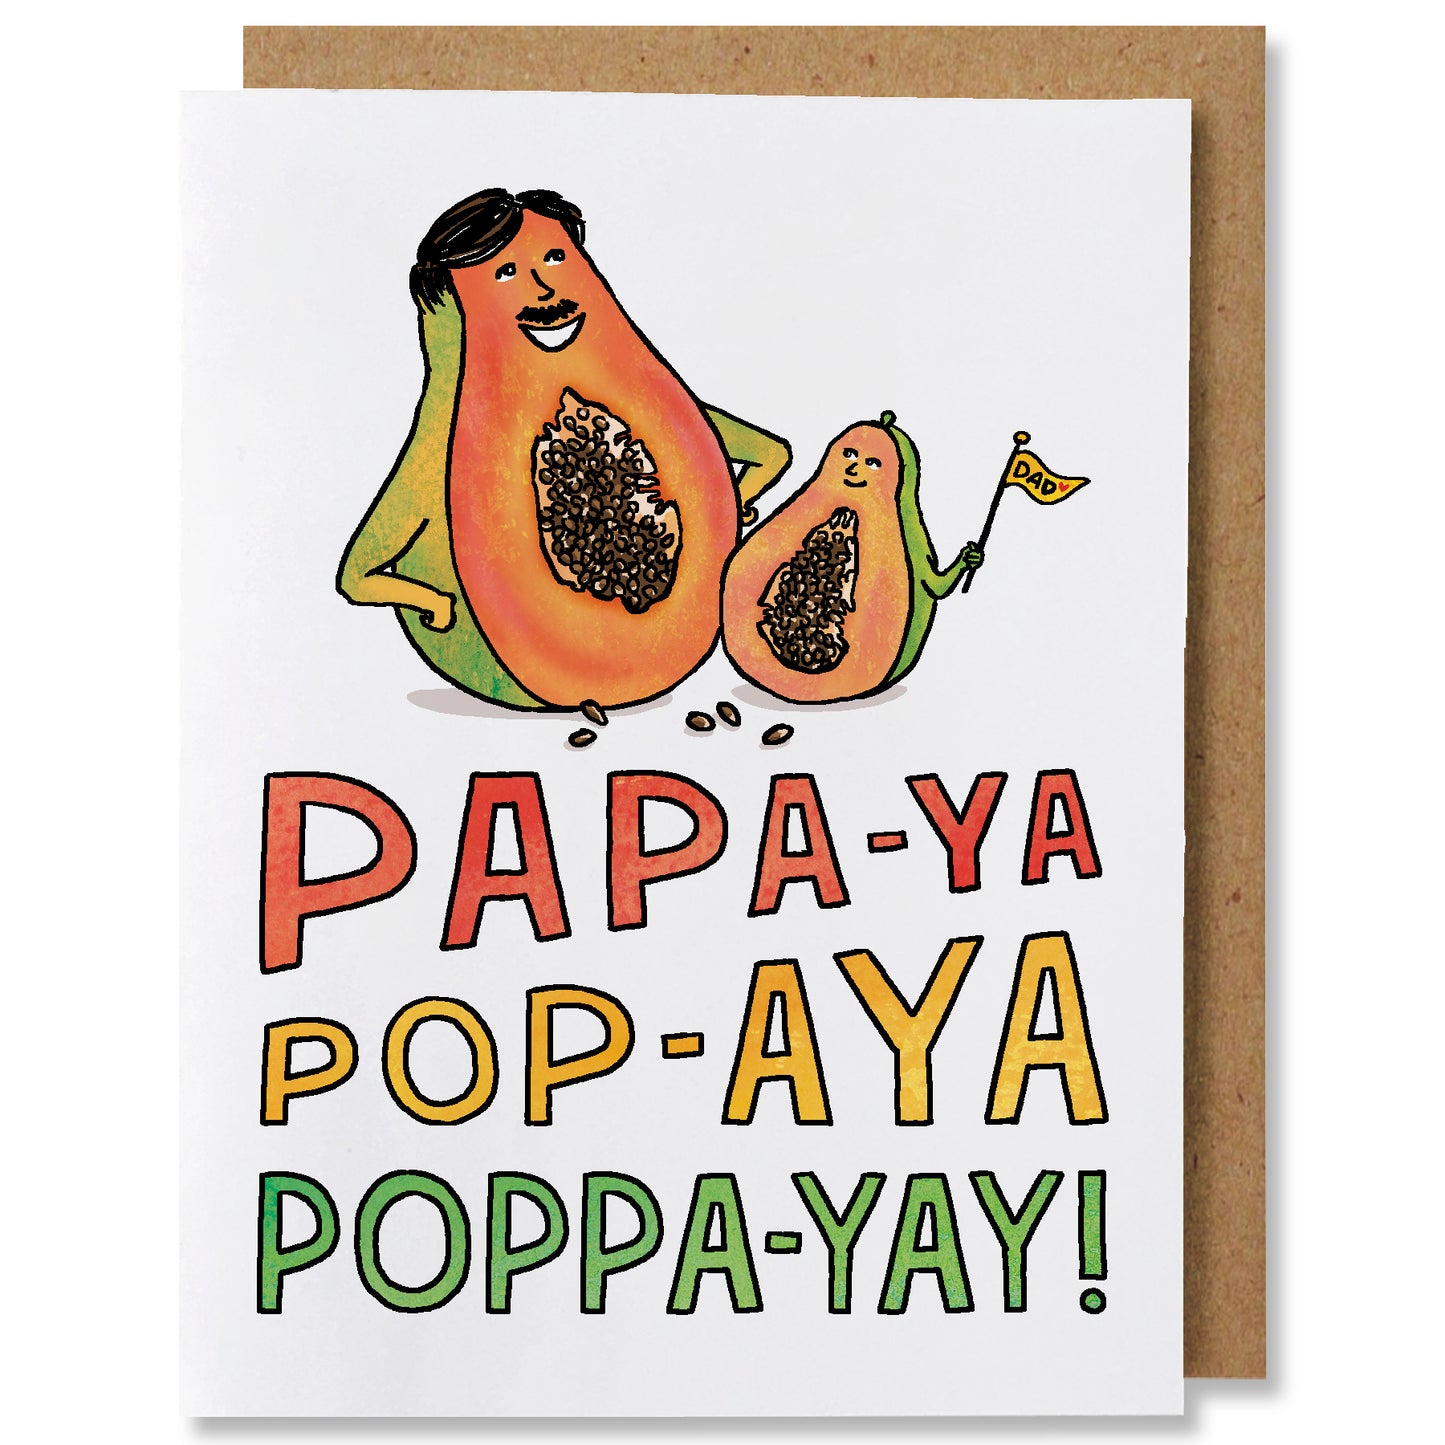 An illustrated greeting card featuring a father papaya with a moustage beside a papaya son holding a flag that says 'dad' with the caption "Papa-ya, pop-aya, poppa-yay!"